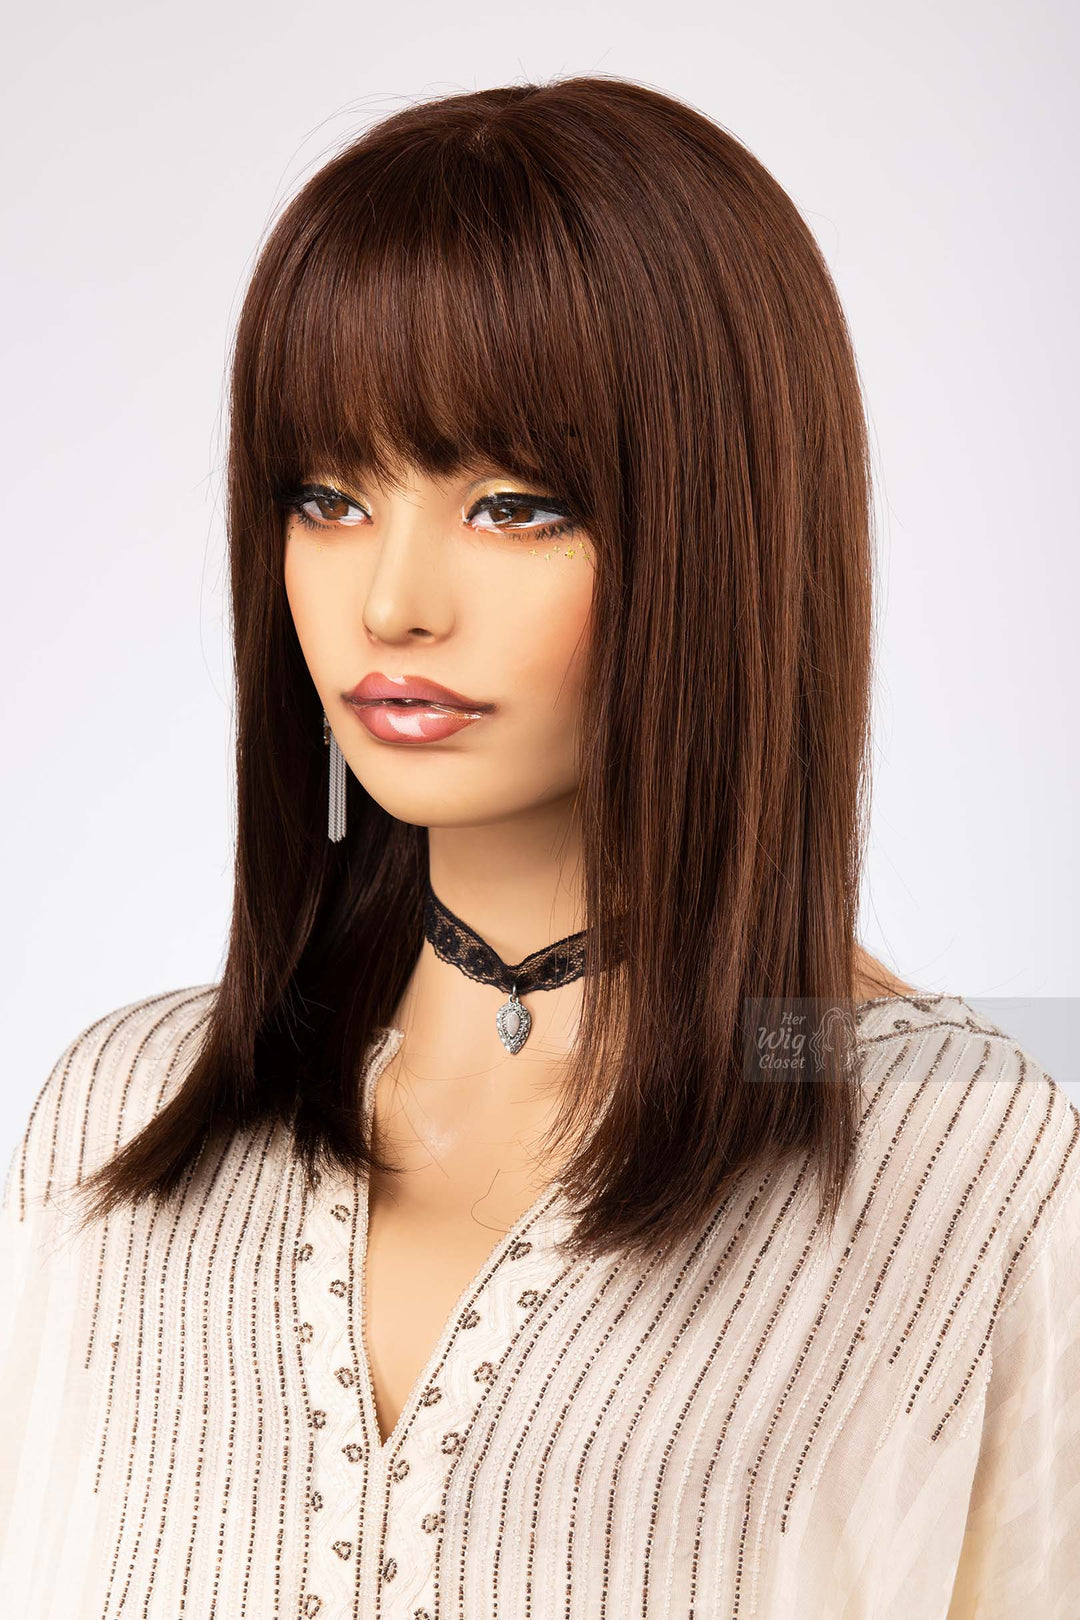 Straight Long Bob Cut Wig Natural Brown Brunette Wig with Bangs